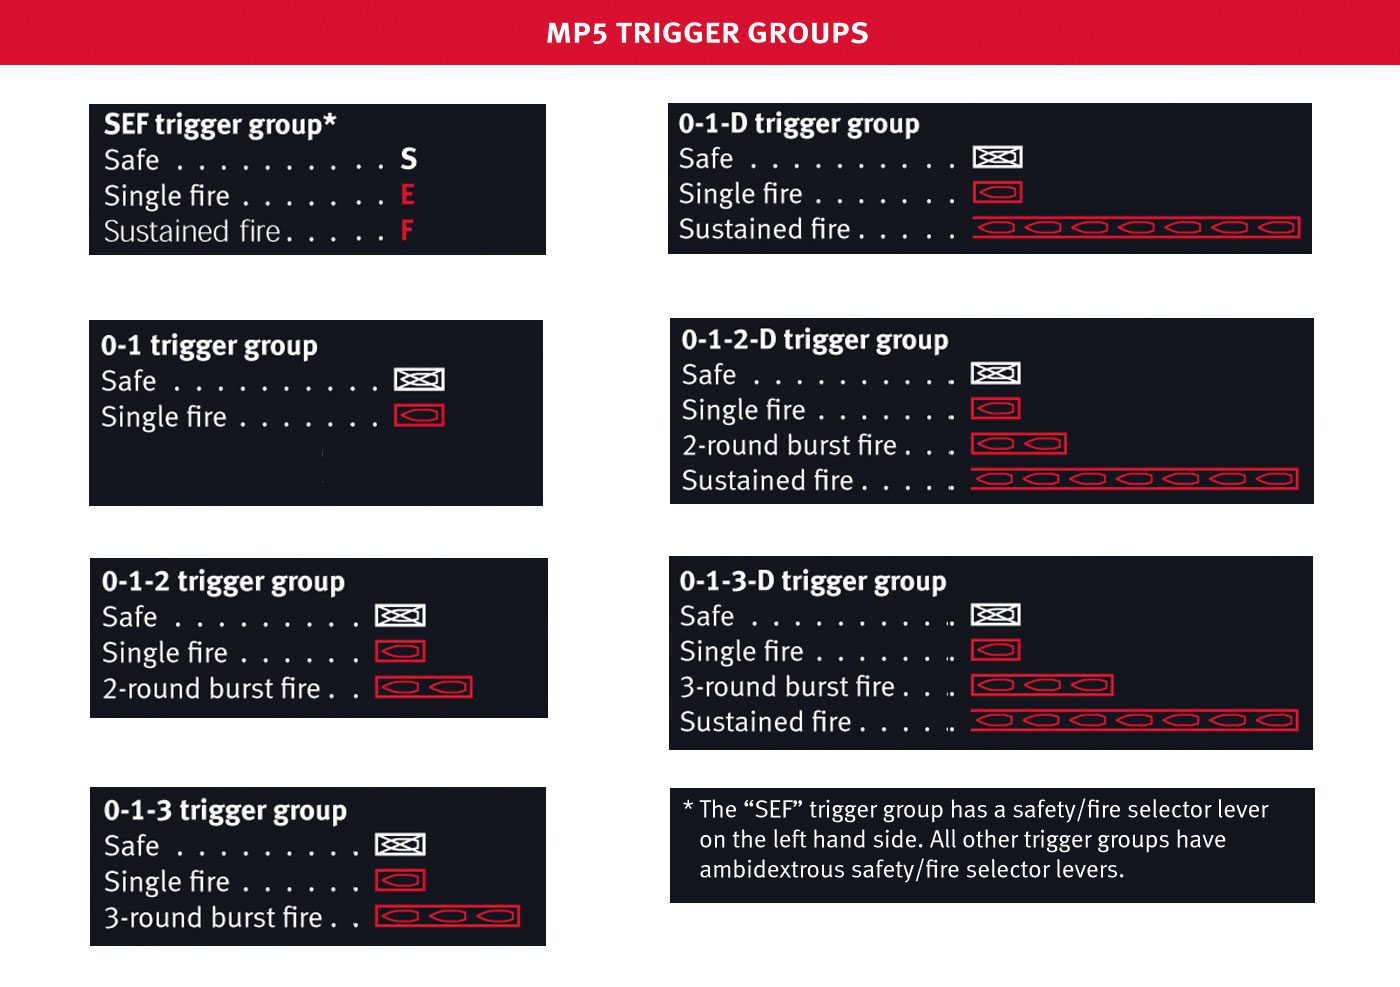 7-MP5-Trigger-Groups-JULY-27-20161